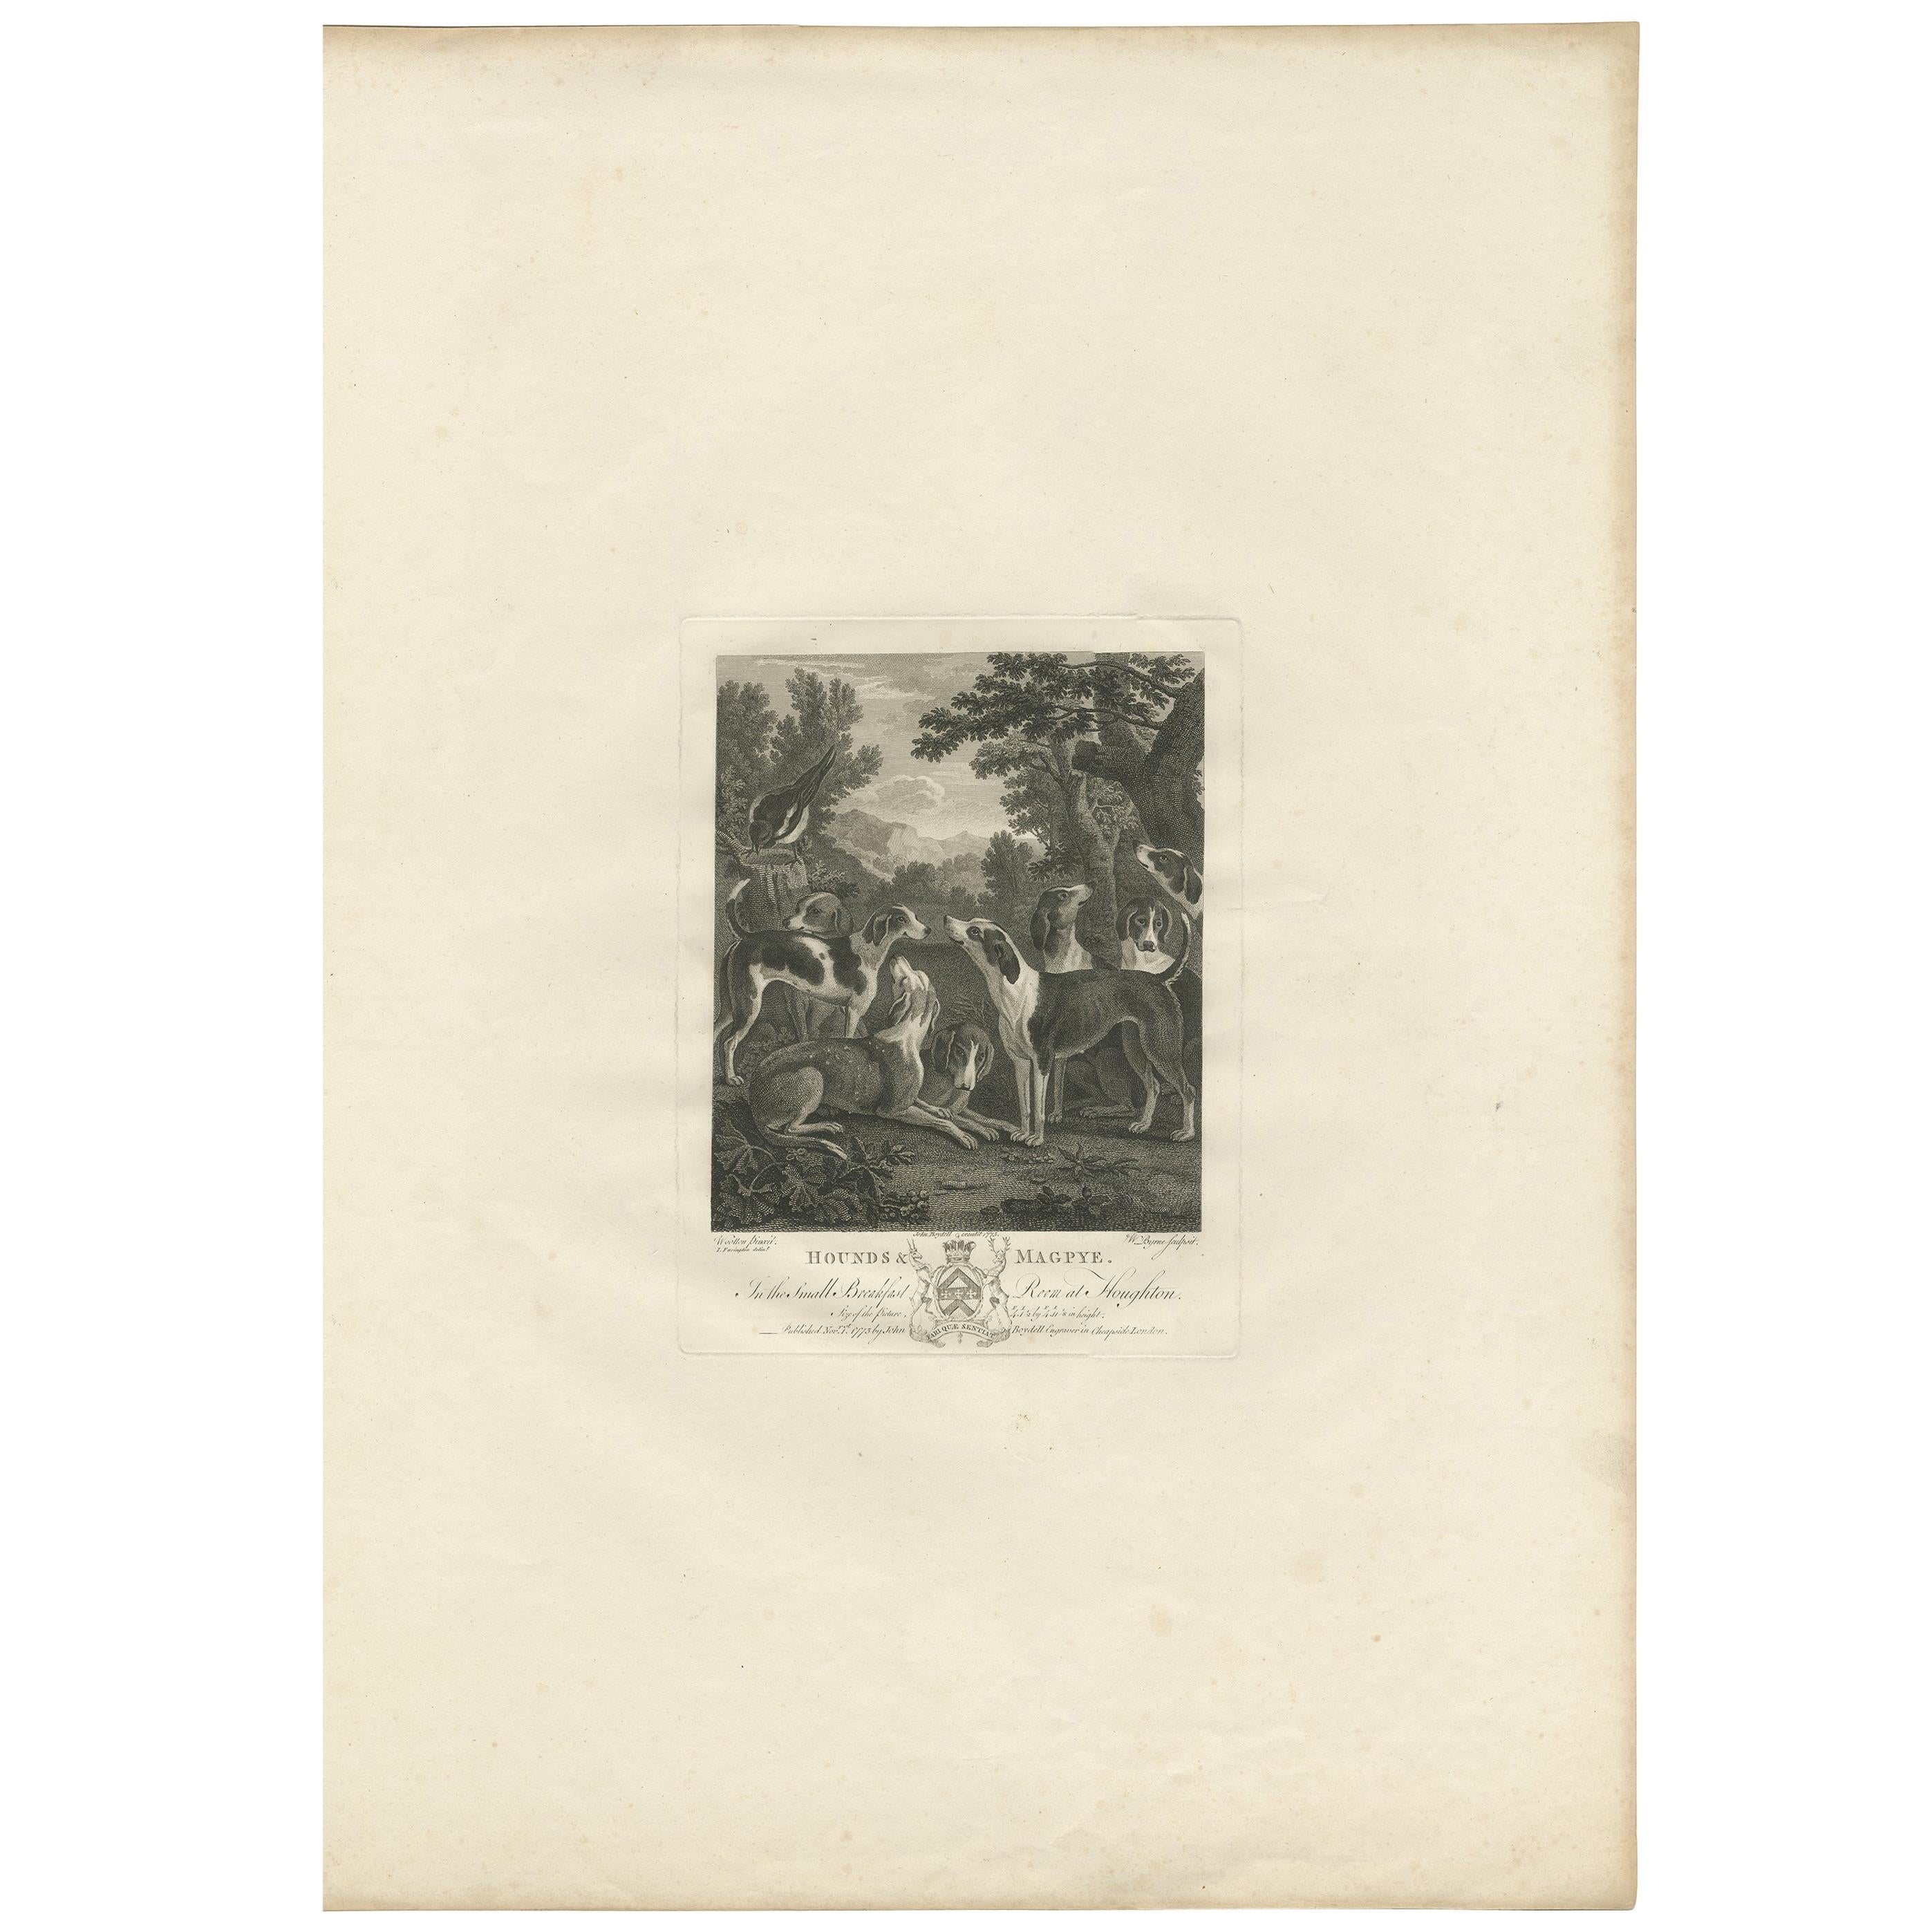 Antique Print of a Group of Hounds Looking Up at a Magpie by Boydell '1775'